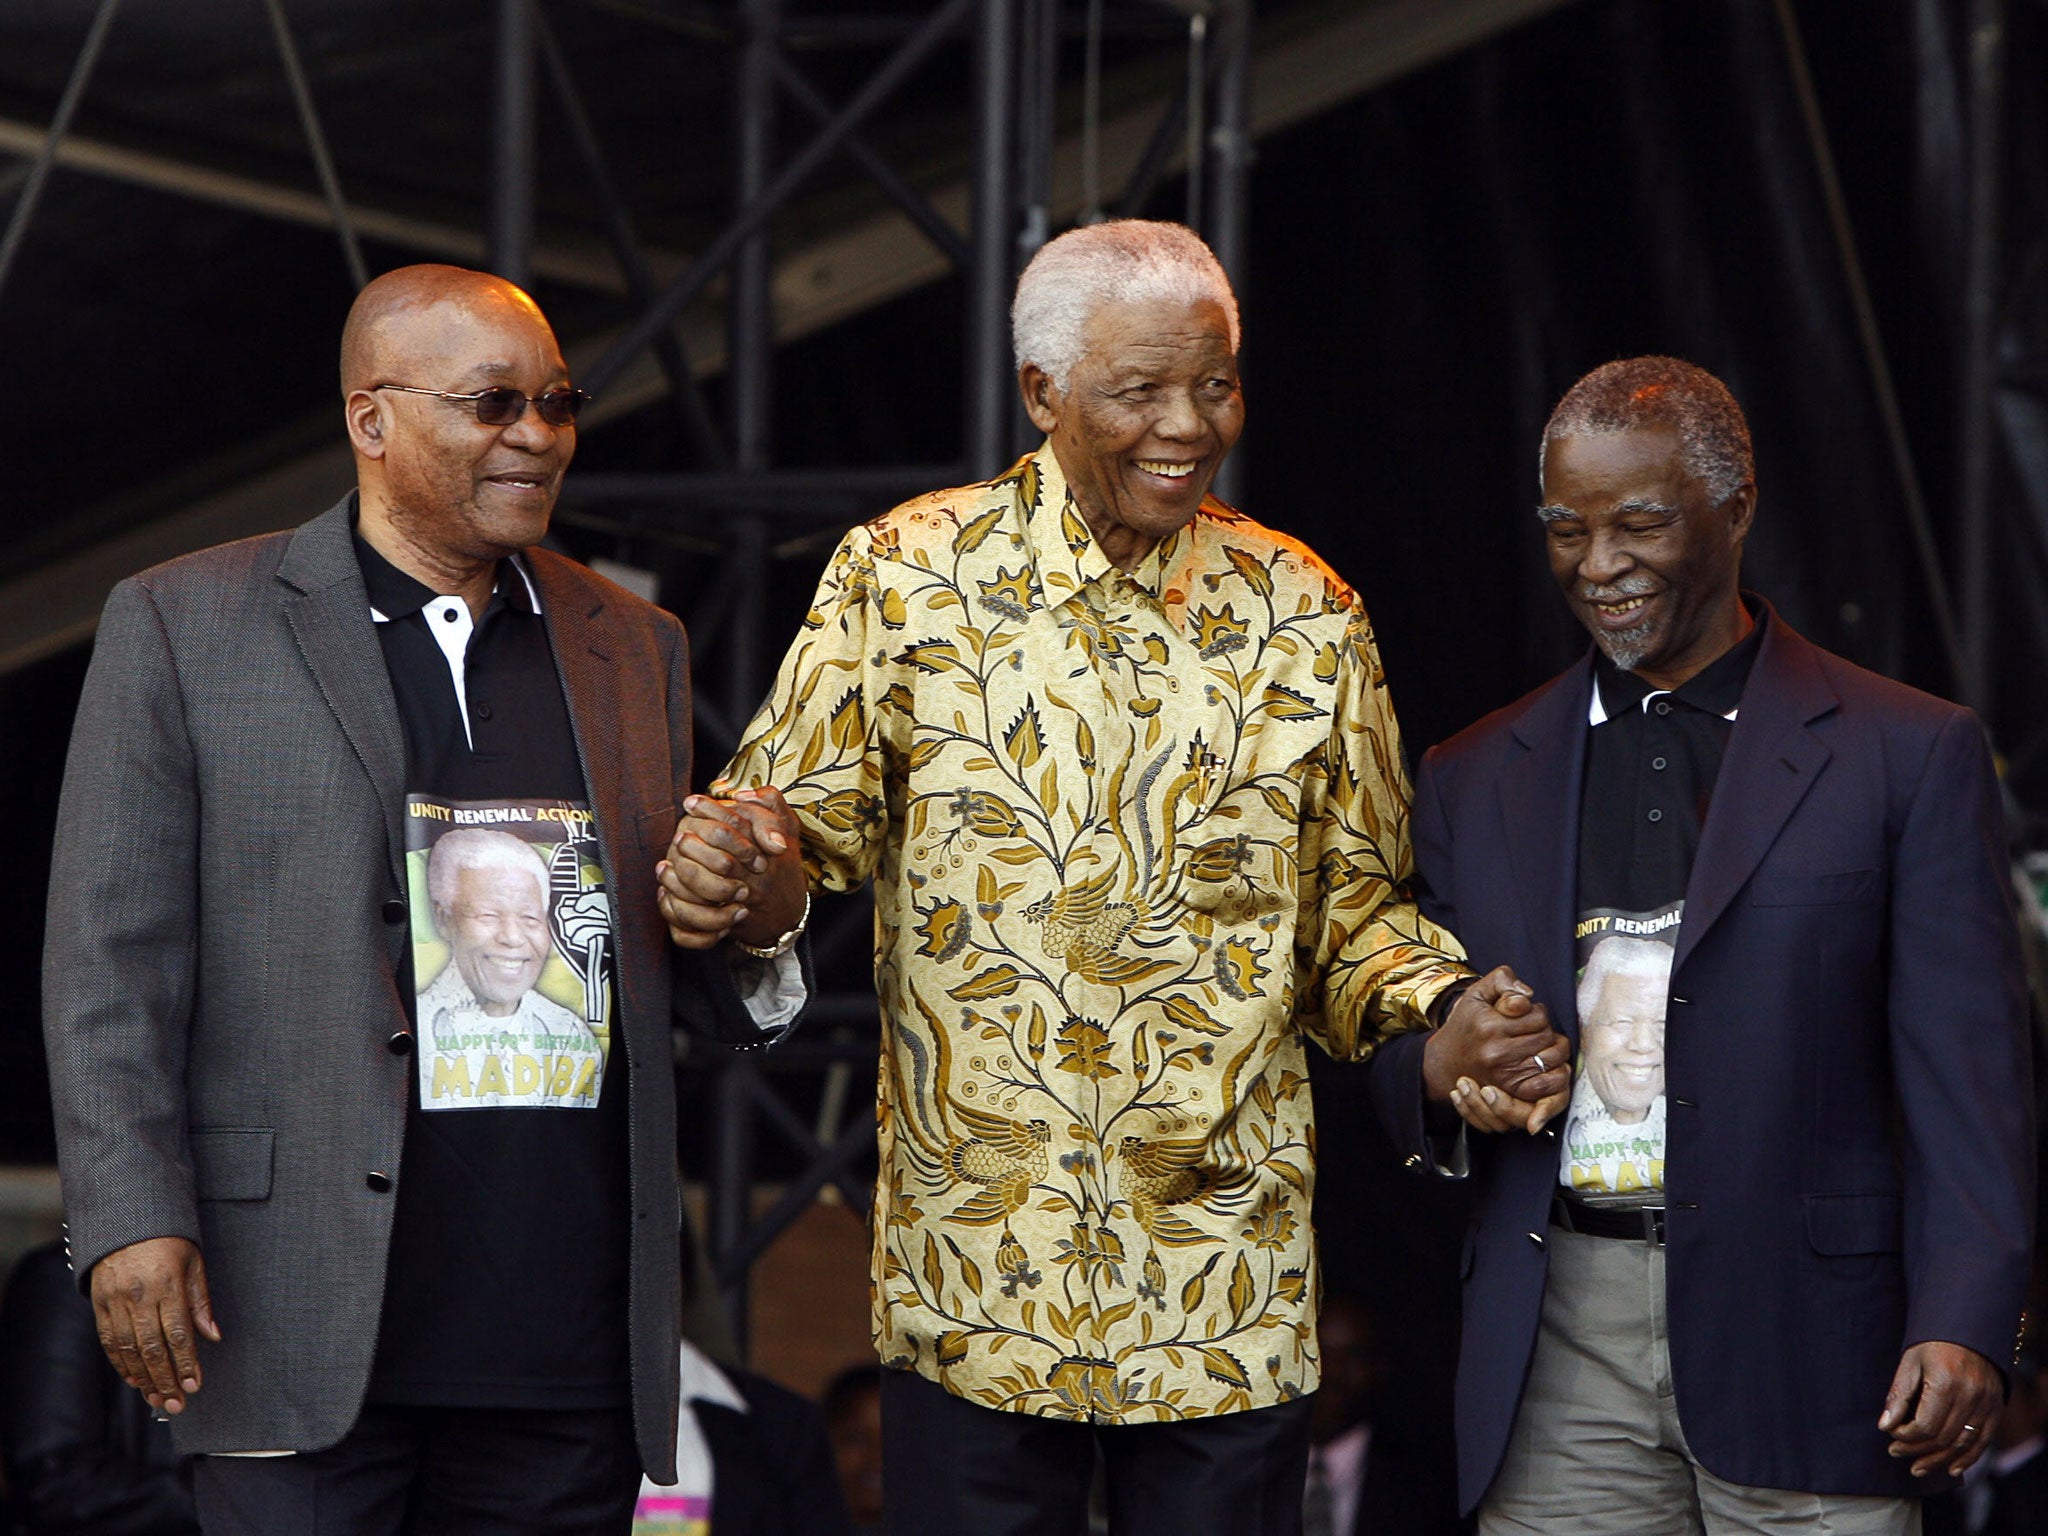 Nelson Mandela's successors Jacob Zuma (left) and Thabo Mbeki (right) have largely failed to follow his example